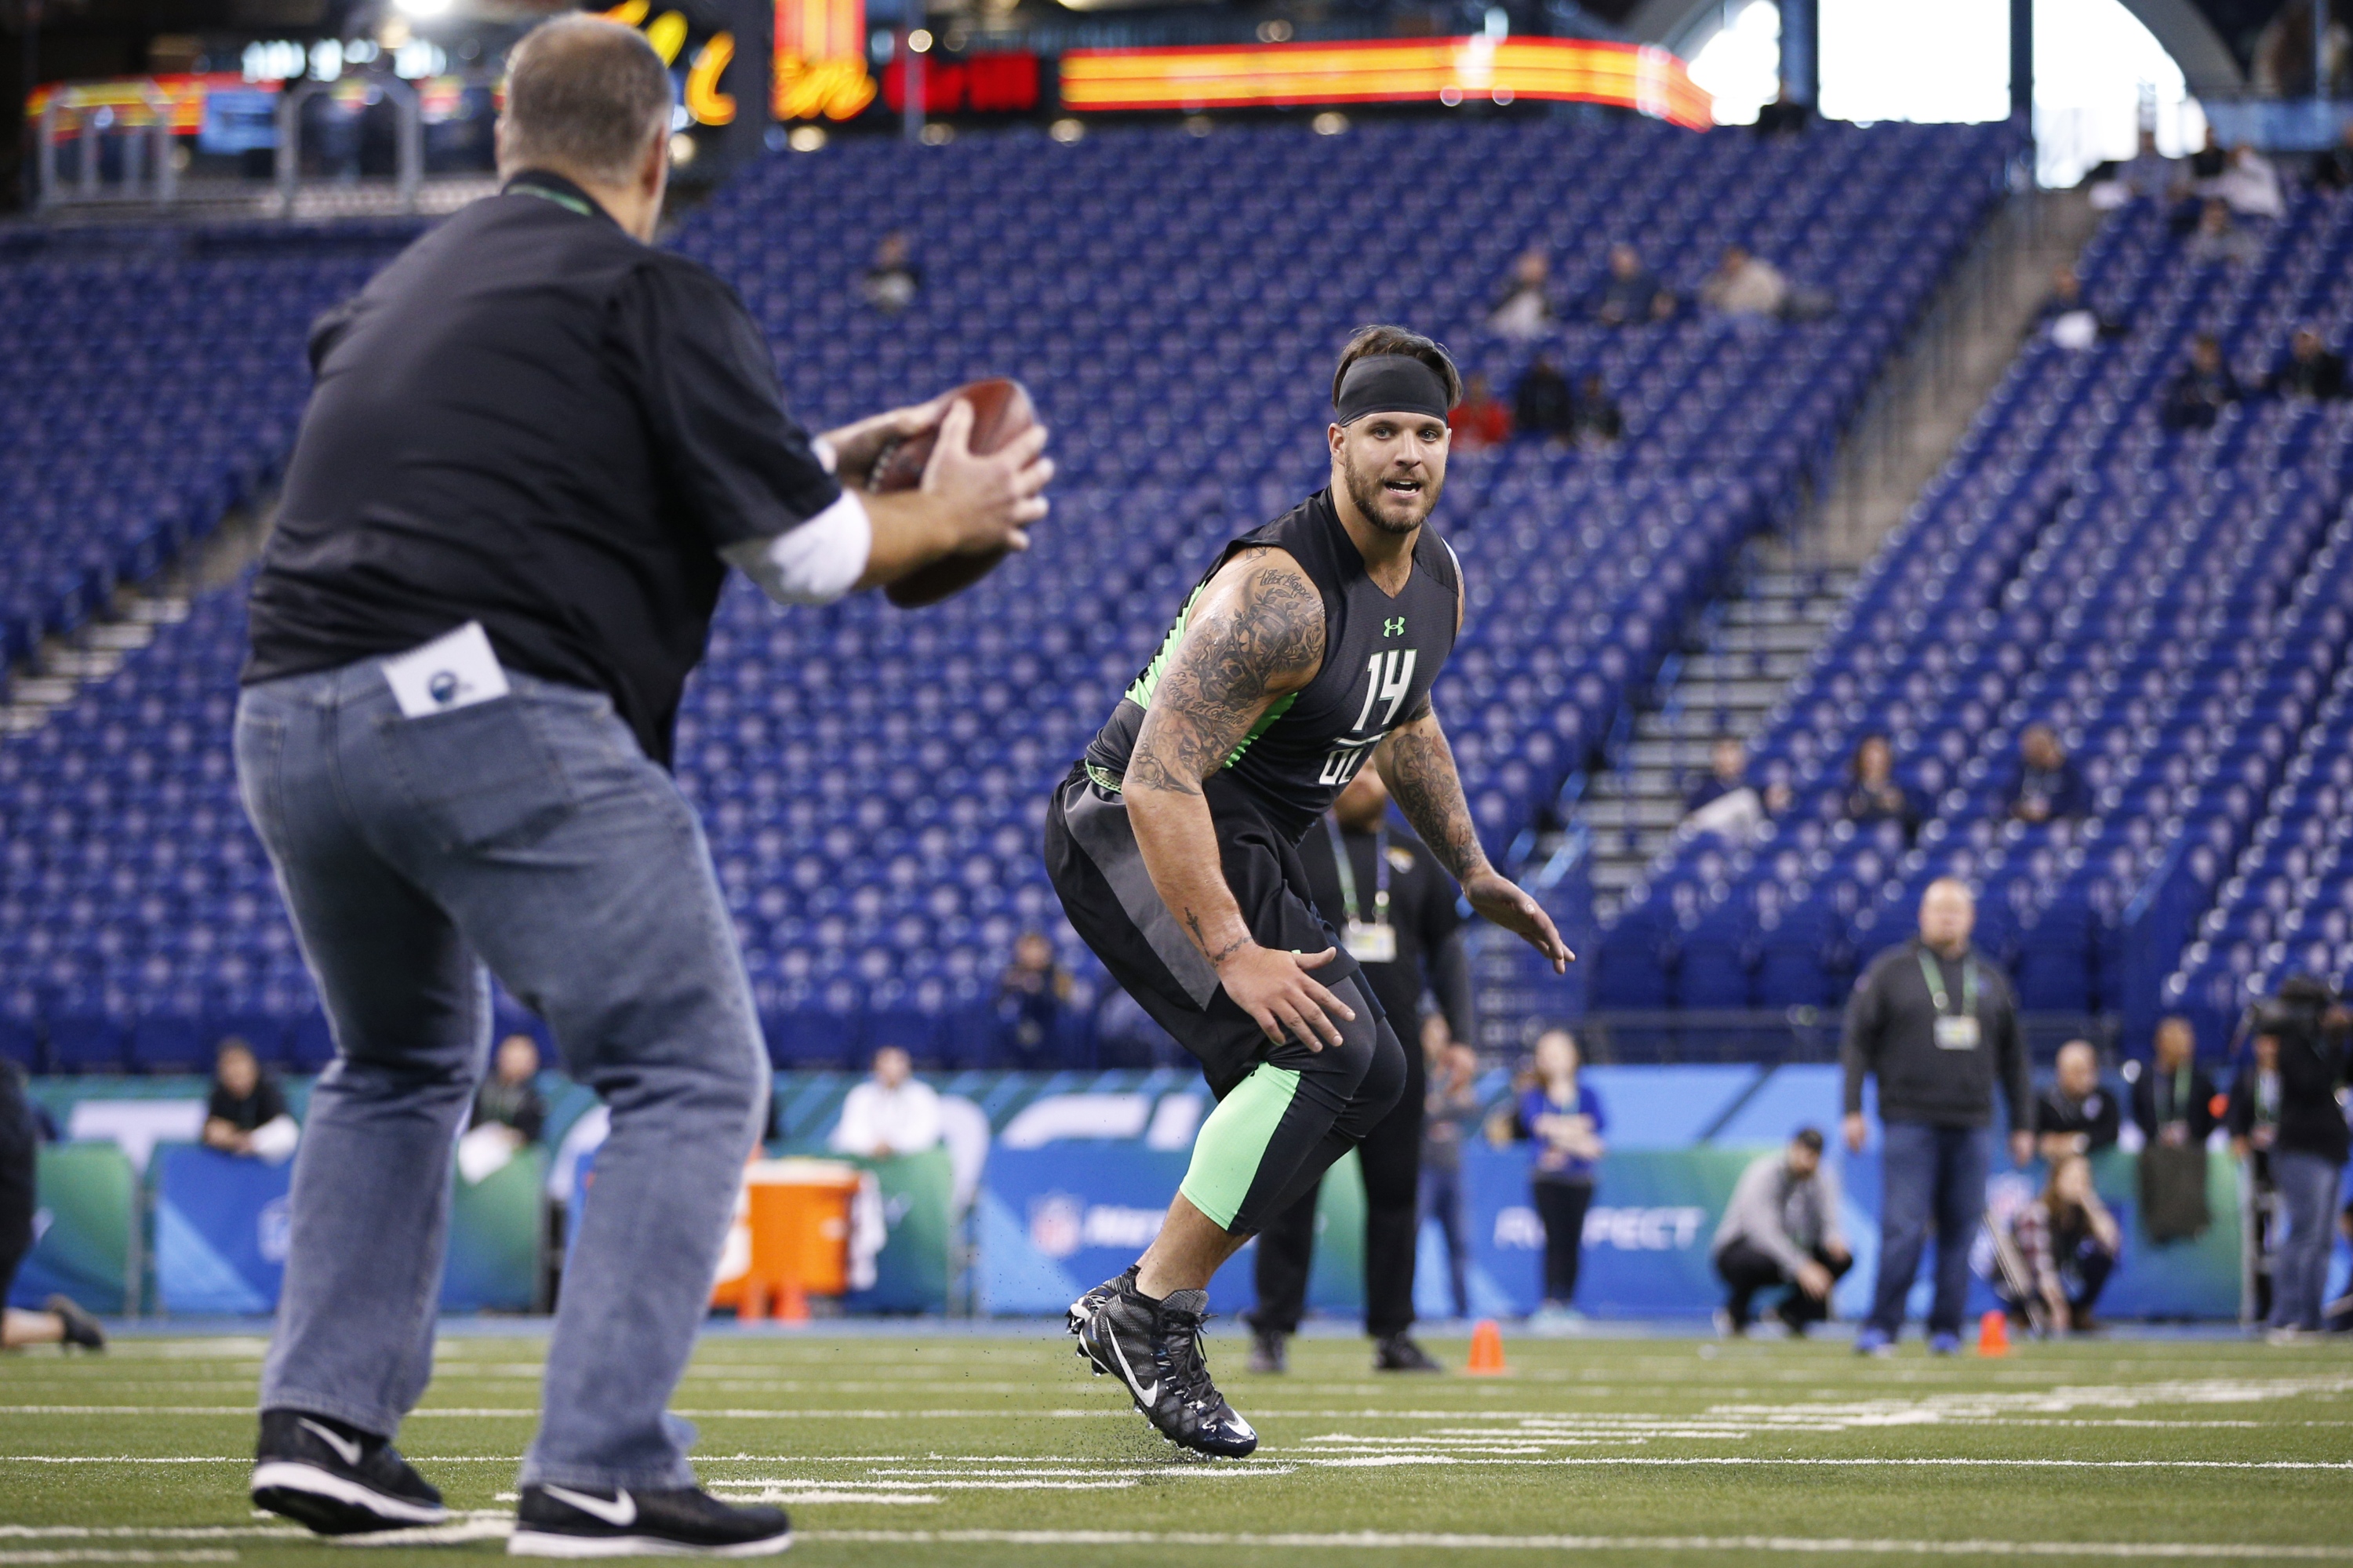 Ohio State OT Taylor Decker at the NFL Scouting Combine (Photo by Joe Robbins/Getty Images)